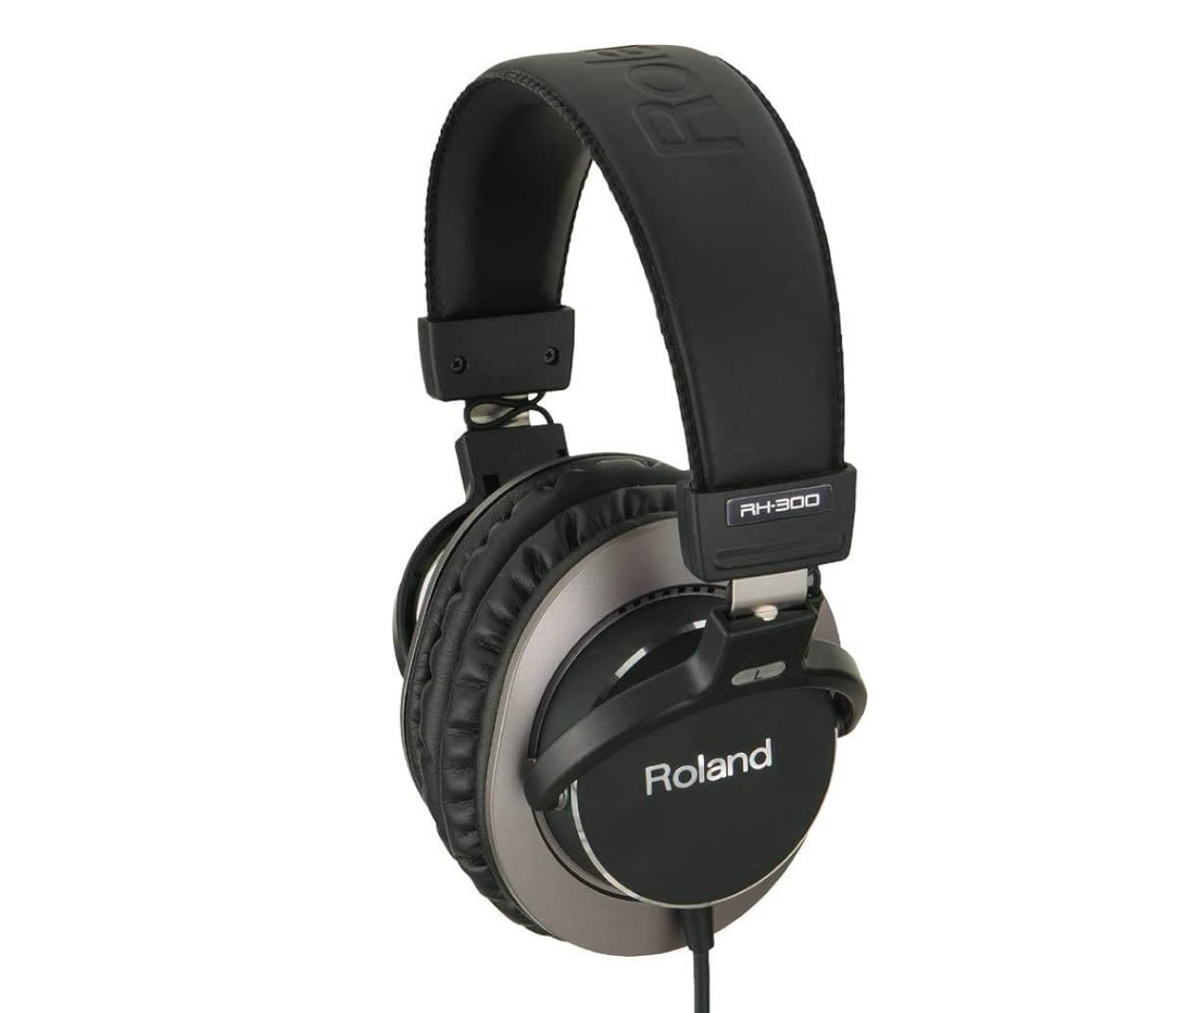 [Pre-Owned] Roland RH-300 Stereo Headphones - ships from San Diego USA